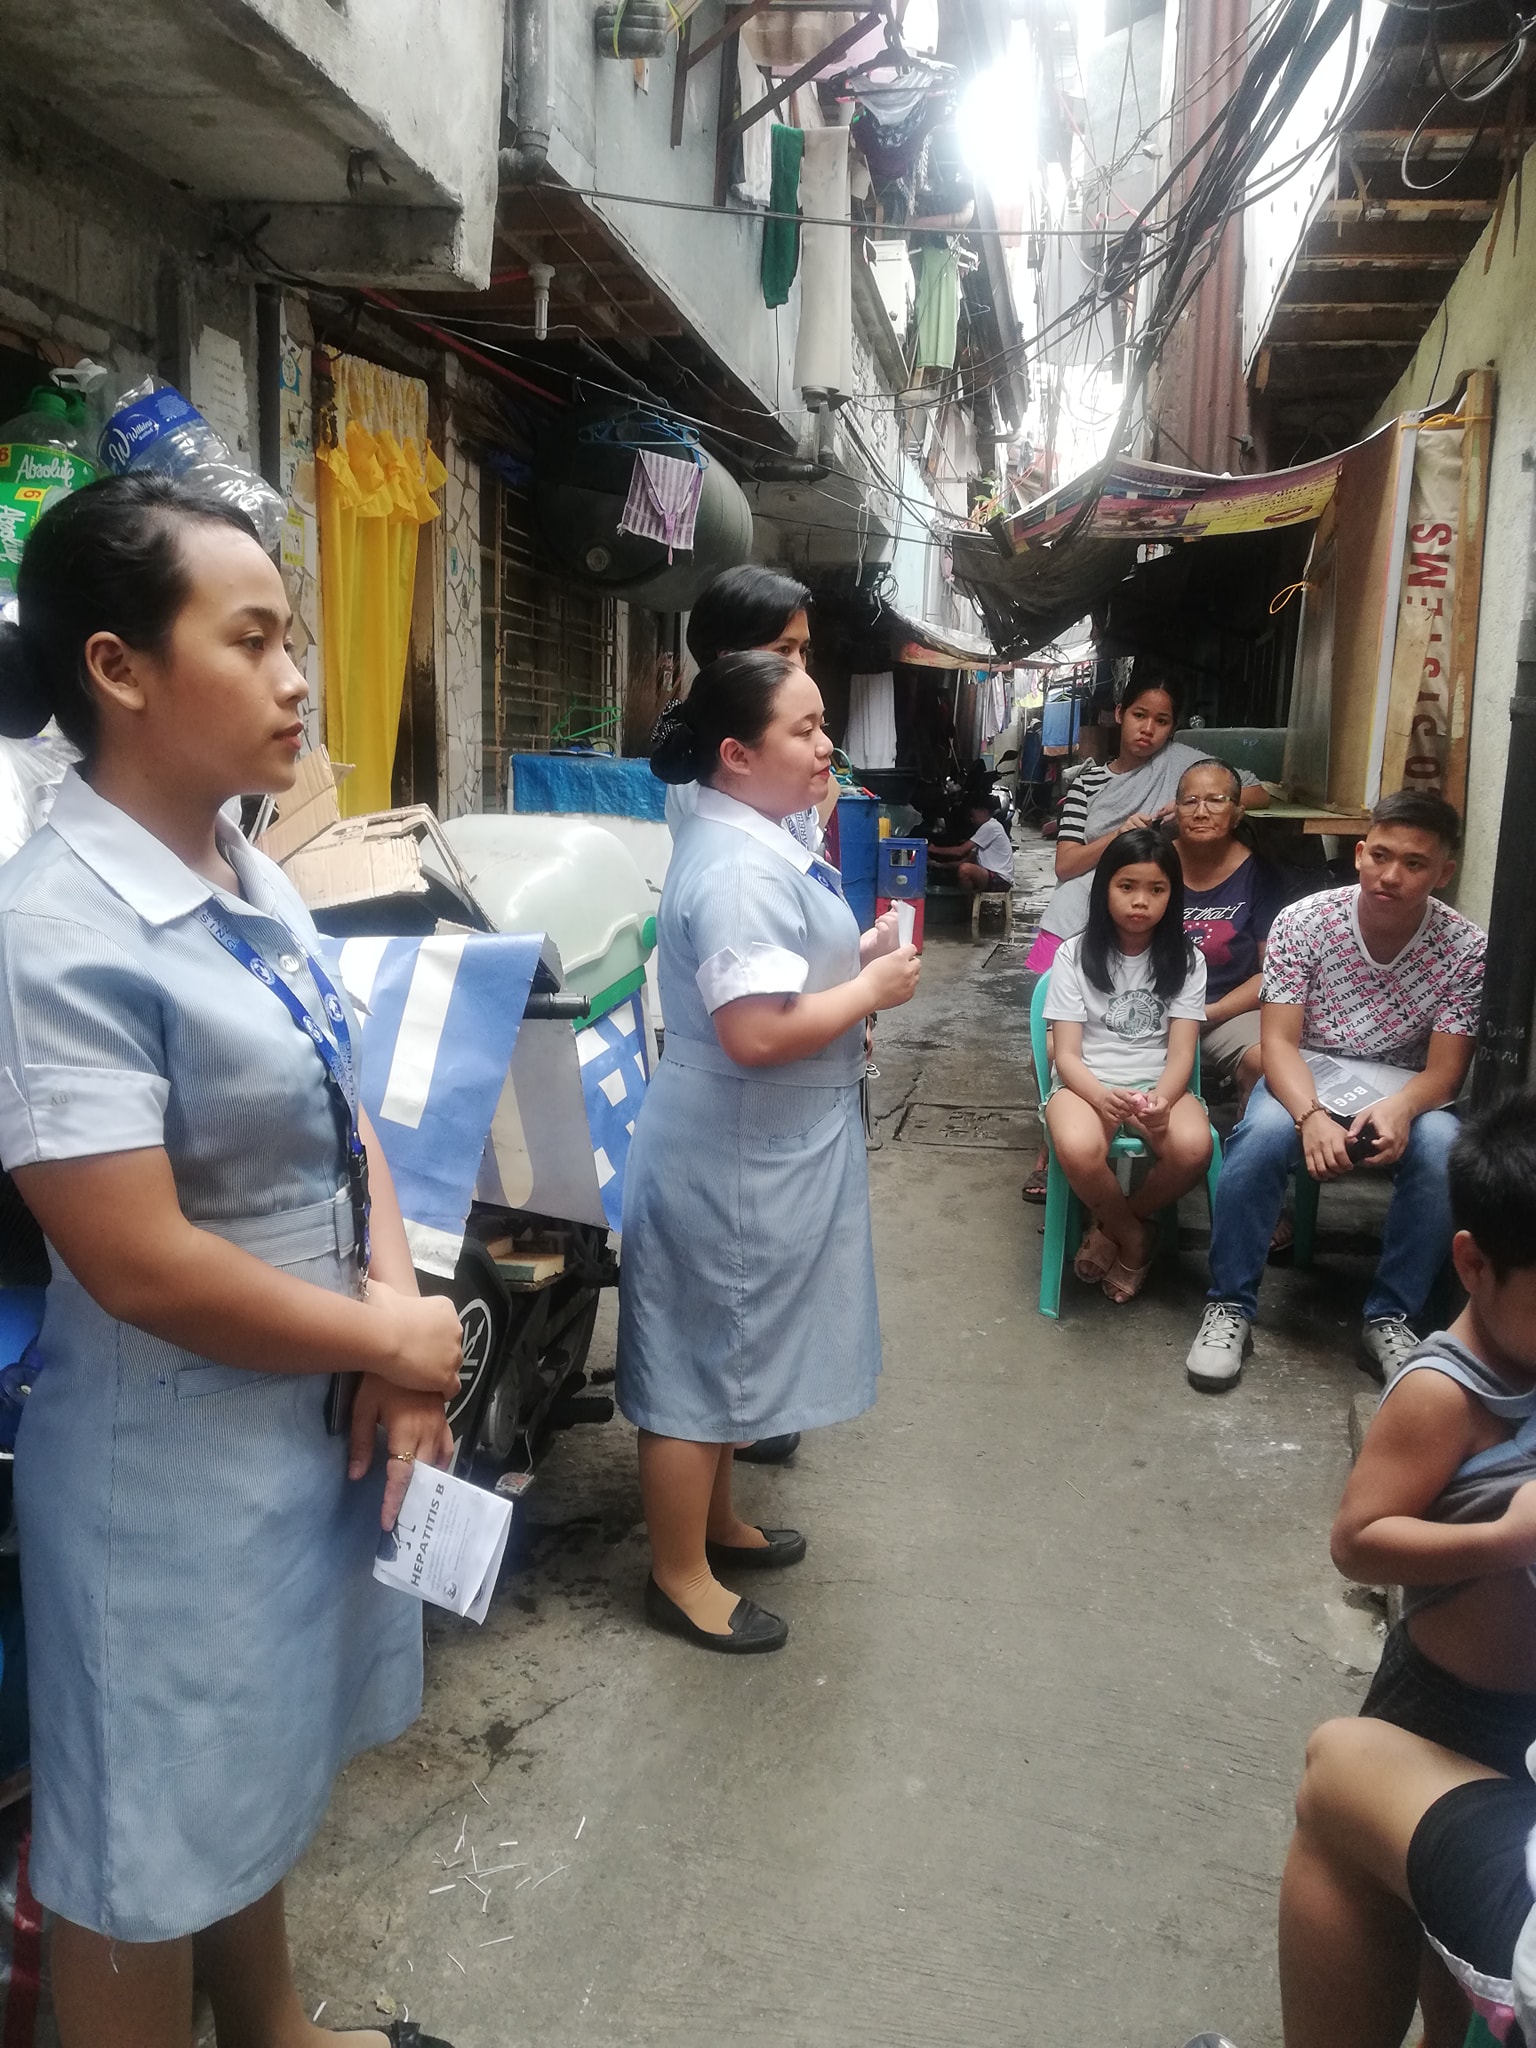 Information, education campaign about vaccines in Gutamco, Pasay City conducted by the College of Nursing, AU JAS Campus.